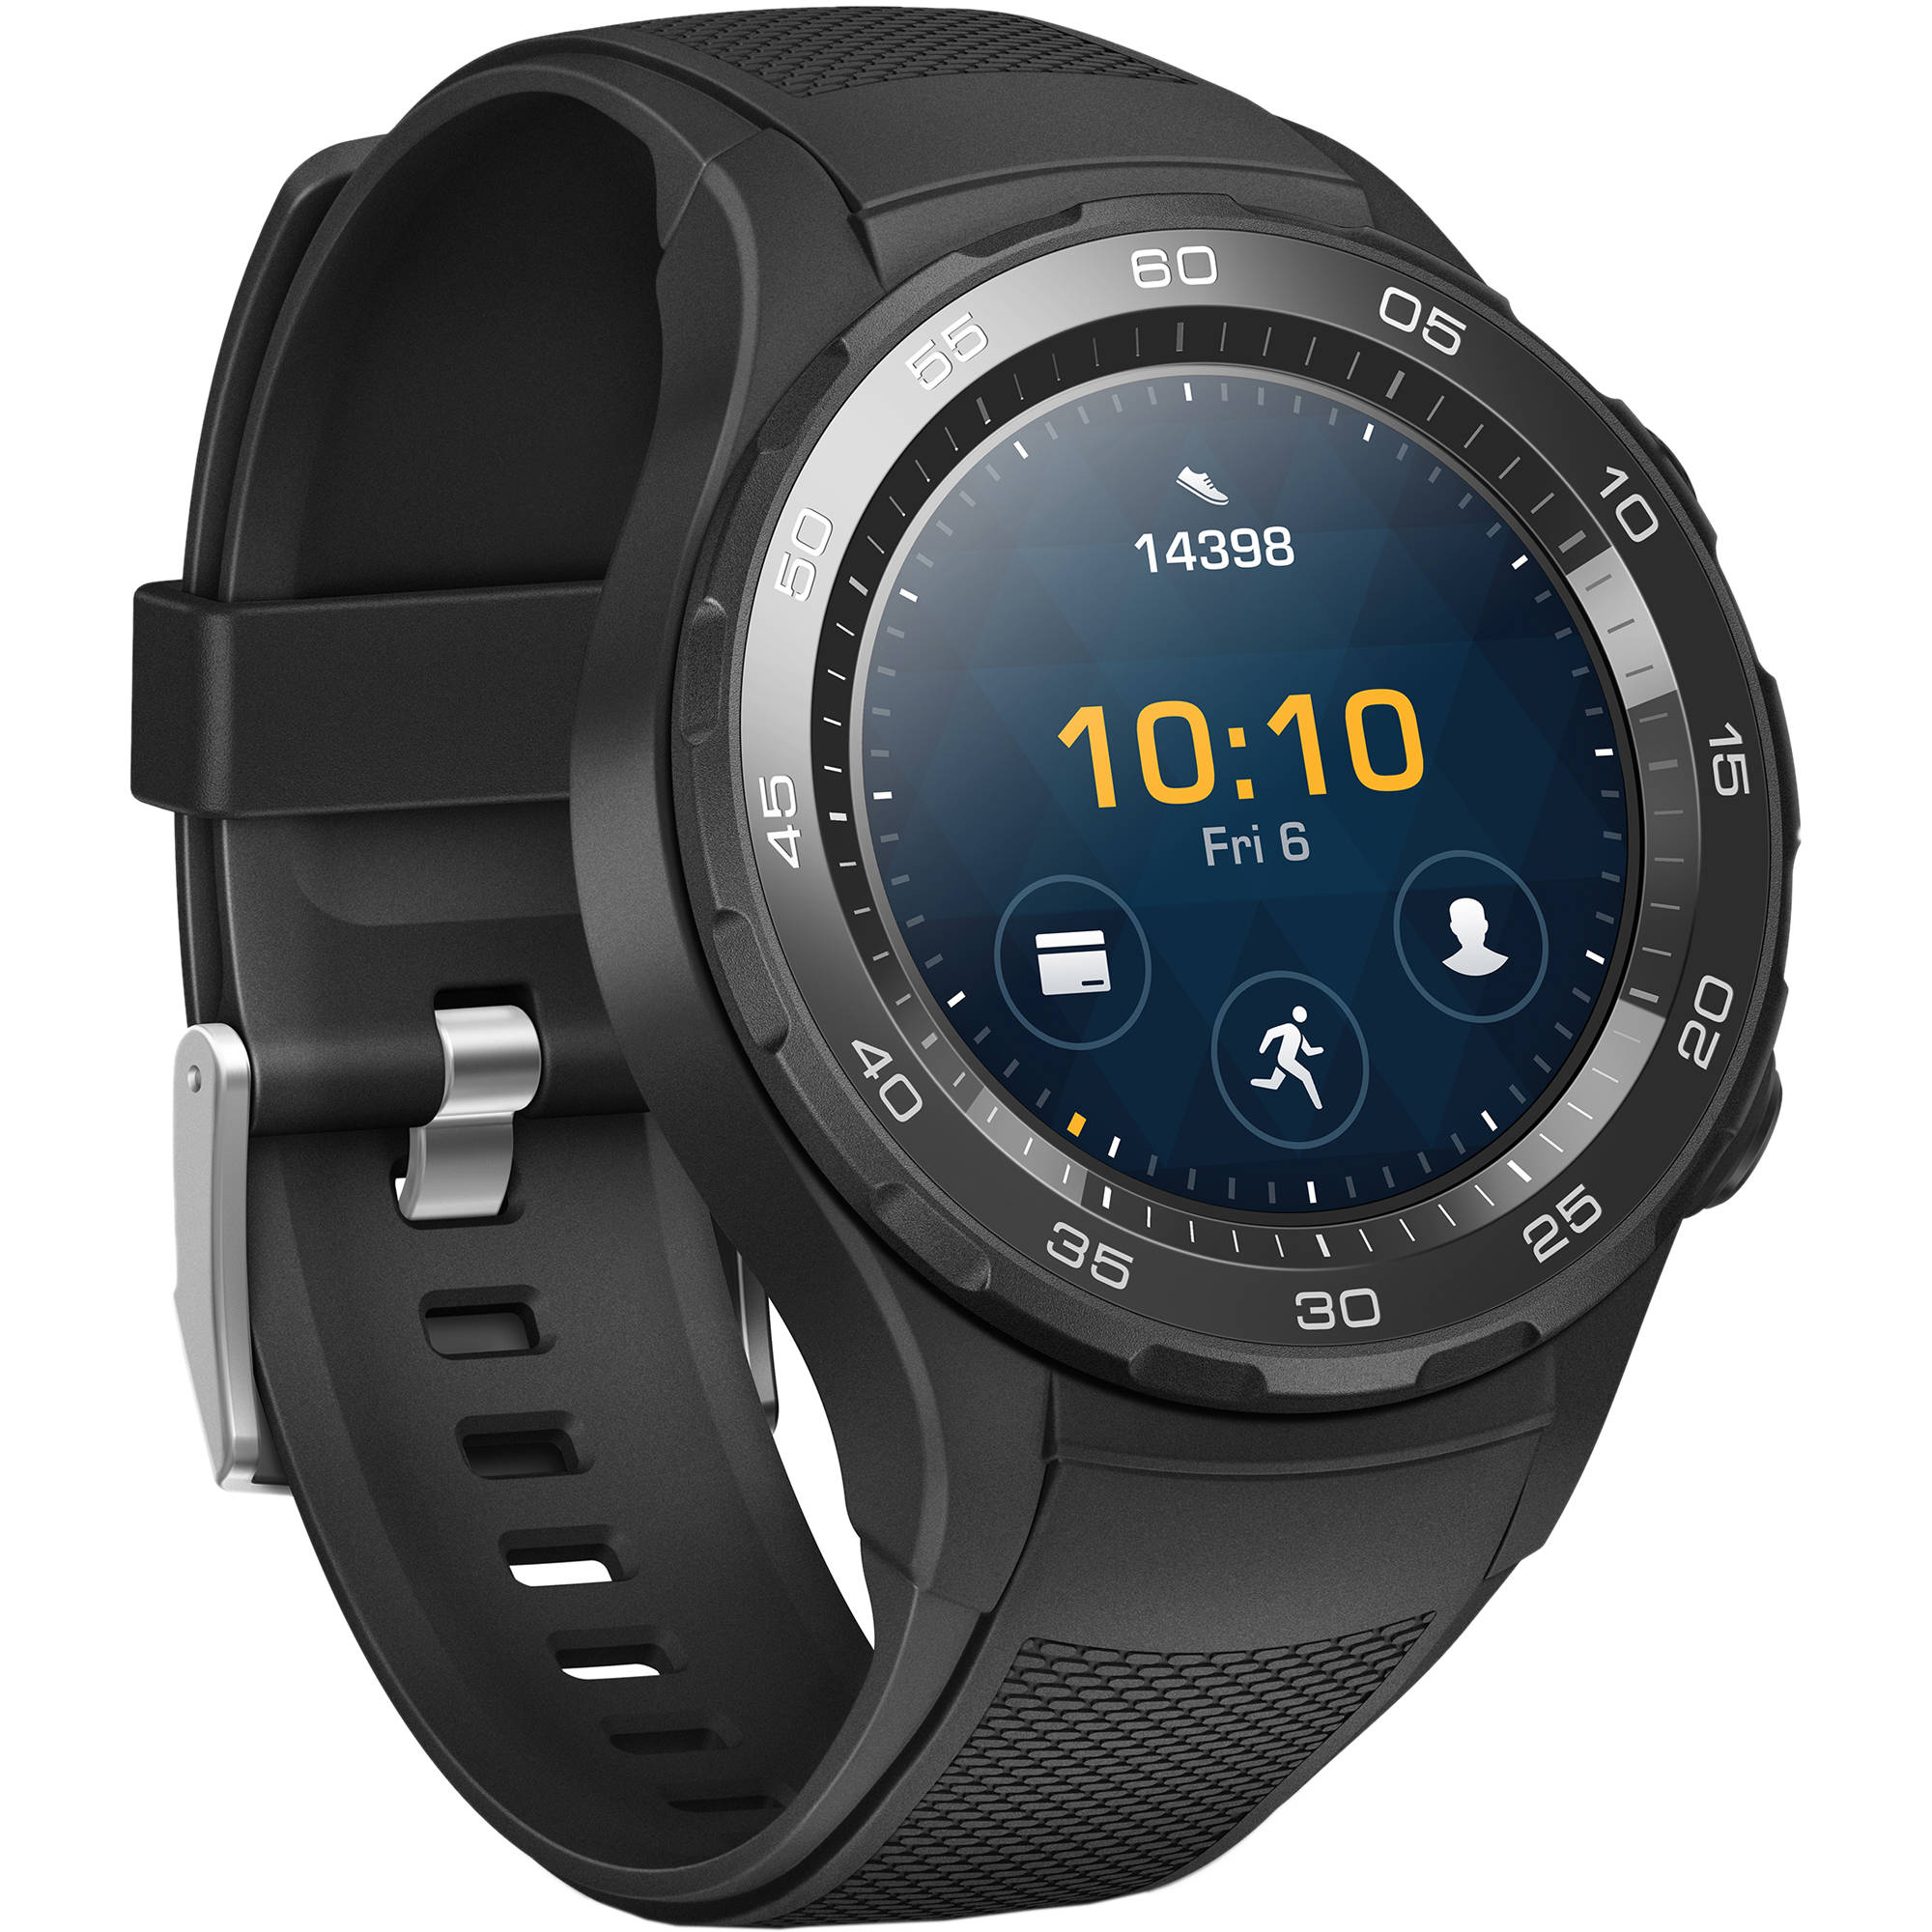 huawei watch 2 compatible with iphone